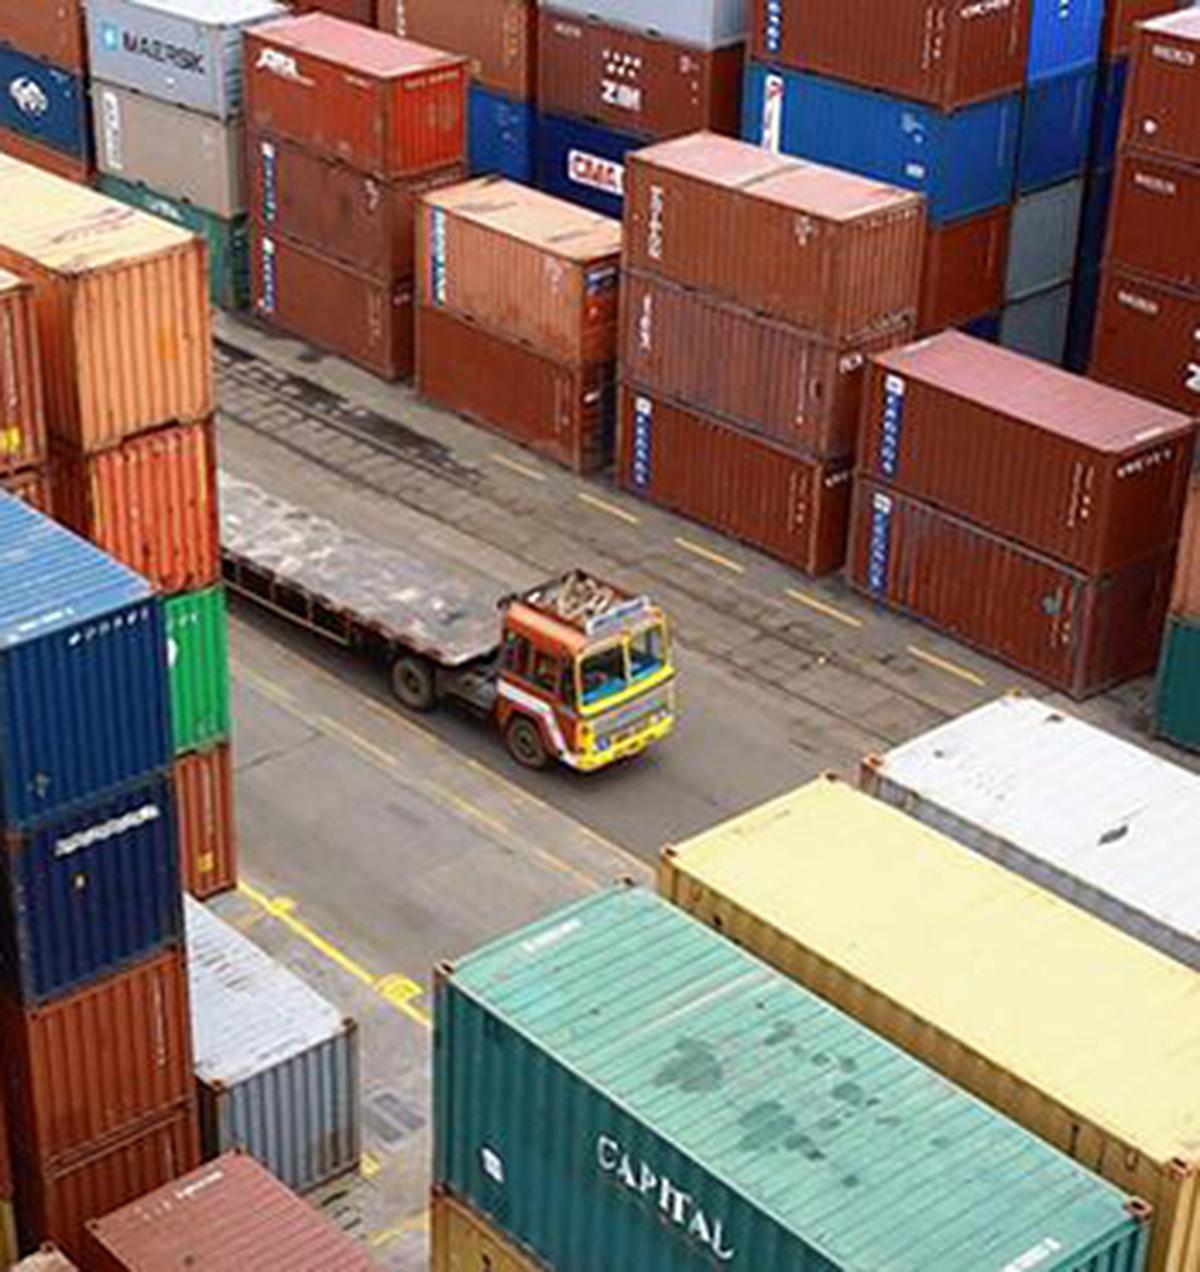 India’s trade deficit increases to $26.91 billion in October